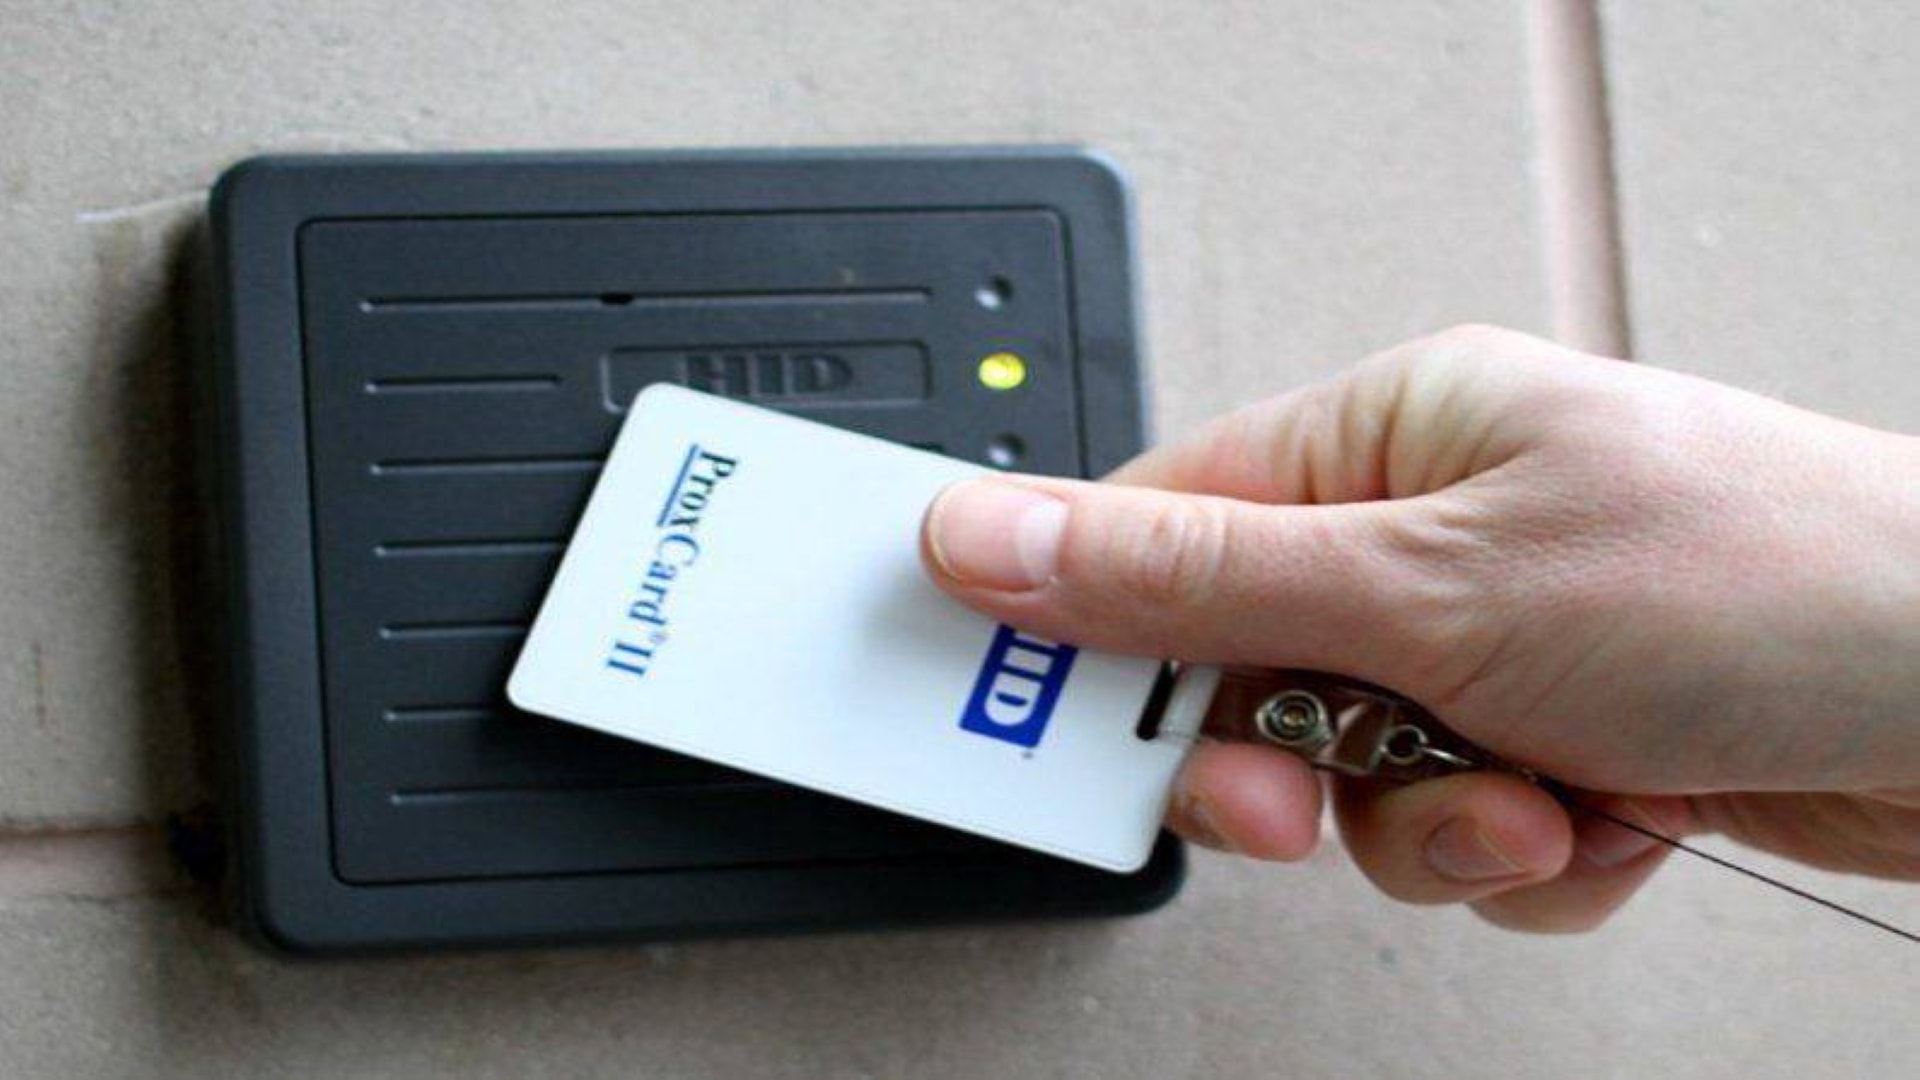 Driver ID technology utilizing HID proximity cards